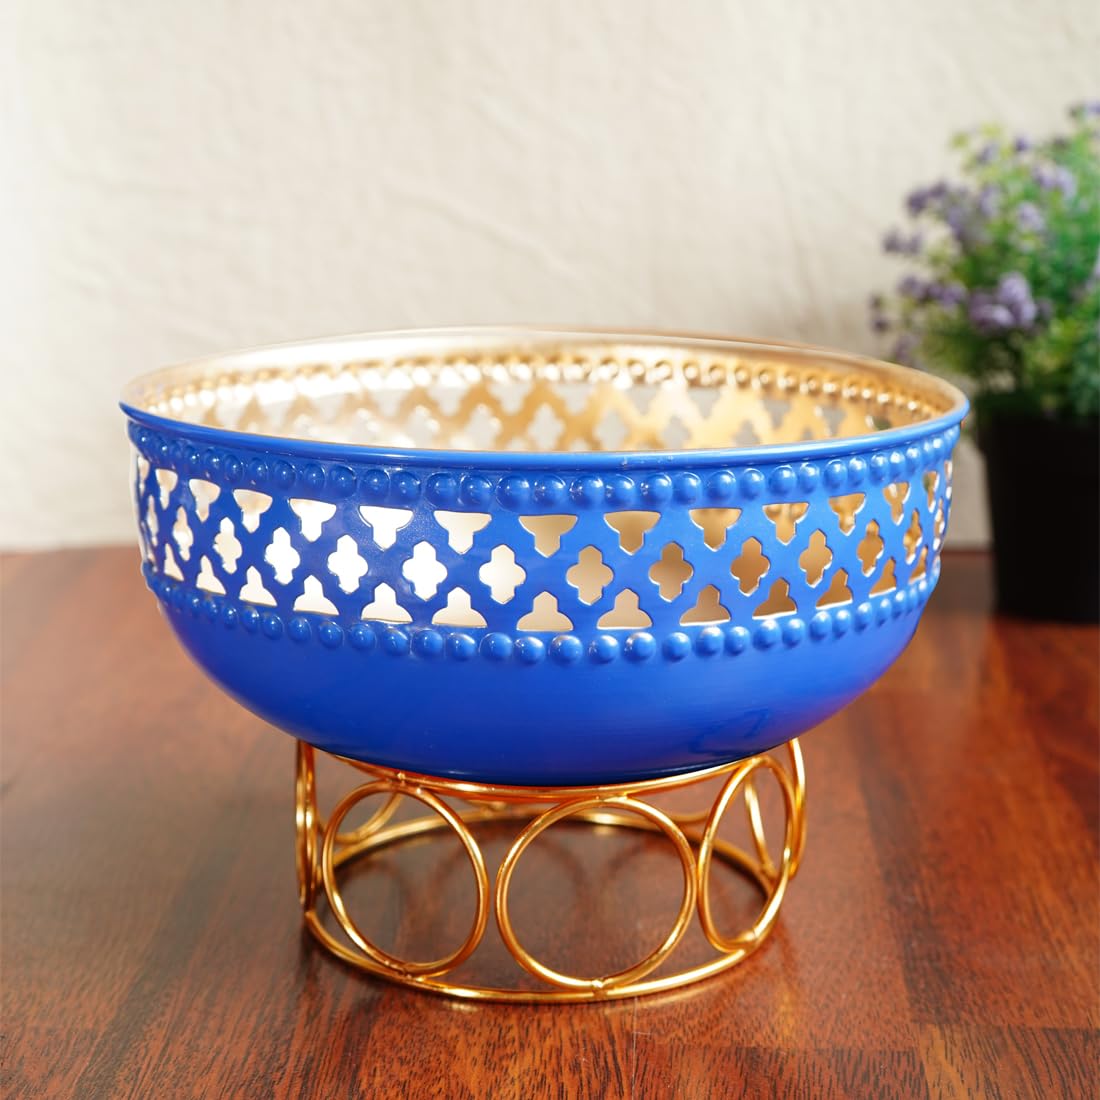 Ekhasa Blue Urli Bowl with Stand for Home Decor & Table Decoration | Floating Flowers, Tealight Candles Water Bowl for Diwali Pooja & Other Festivals | Gift for Various Occasions